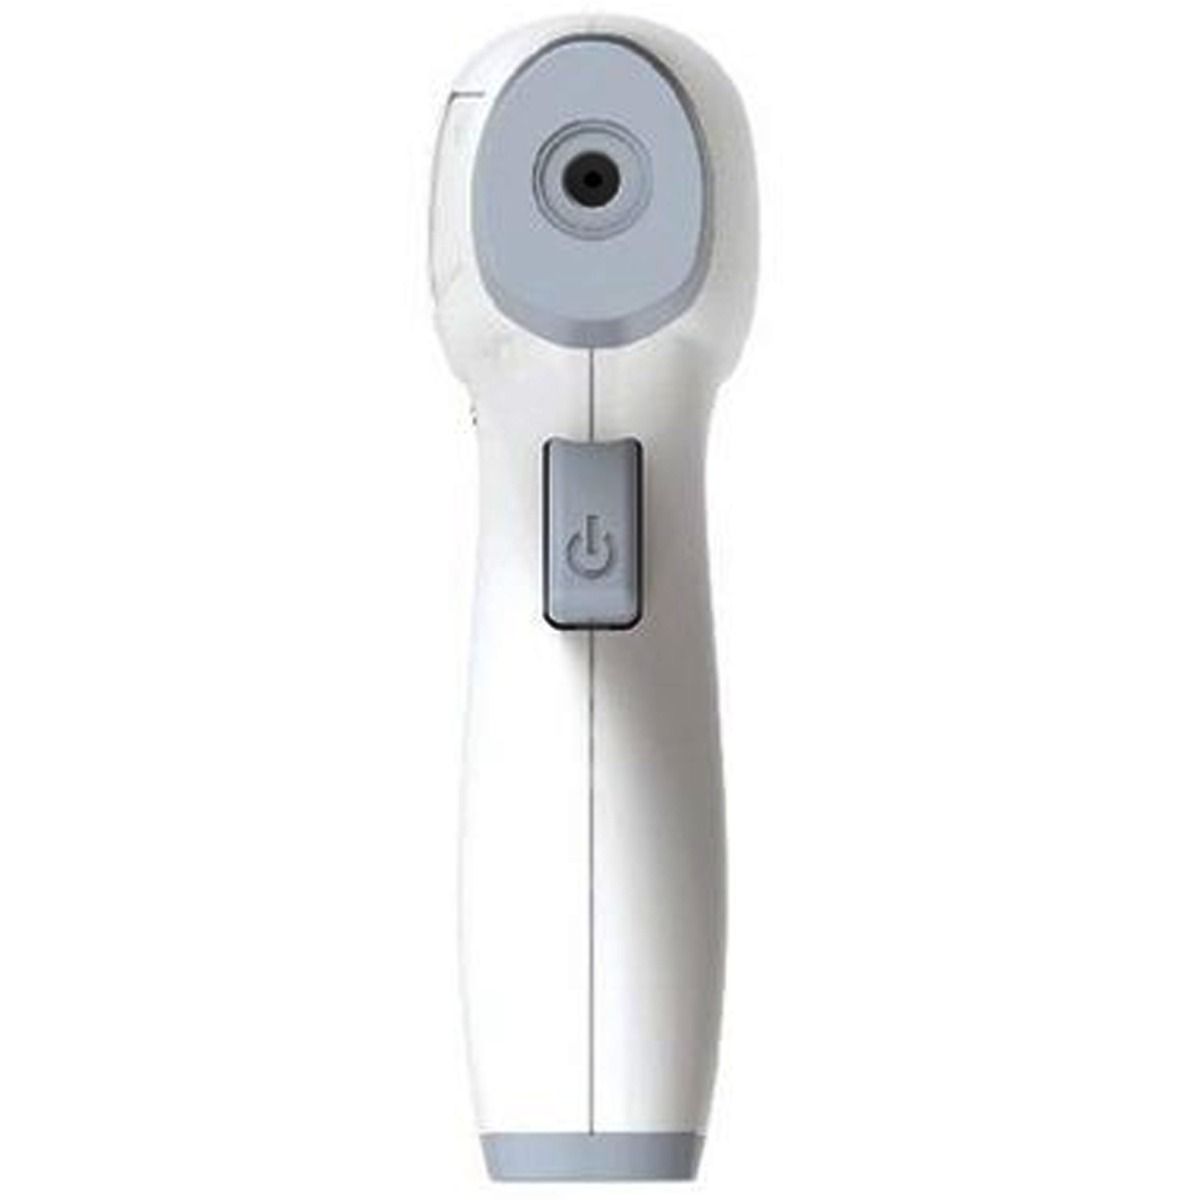 Contec TP500 Infrared Thermometer, Pack of 1 